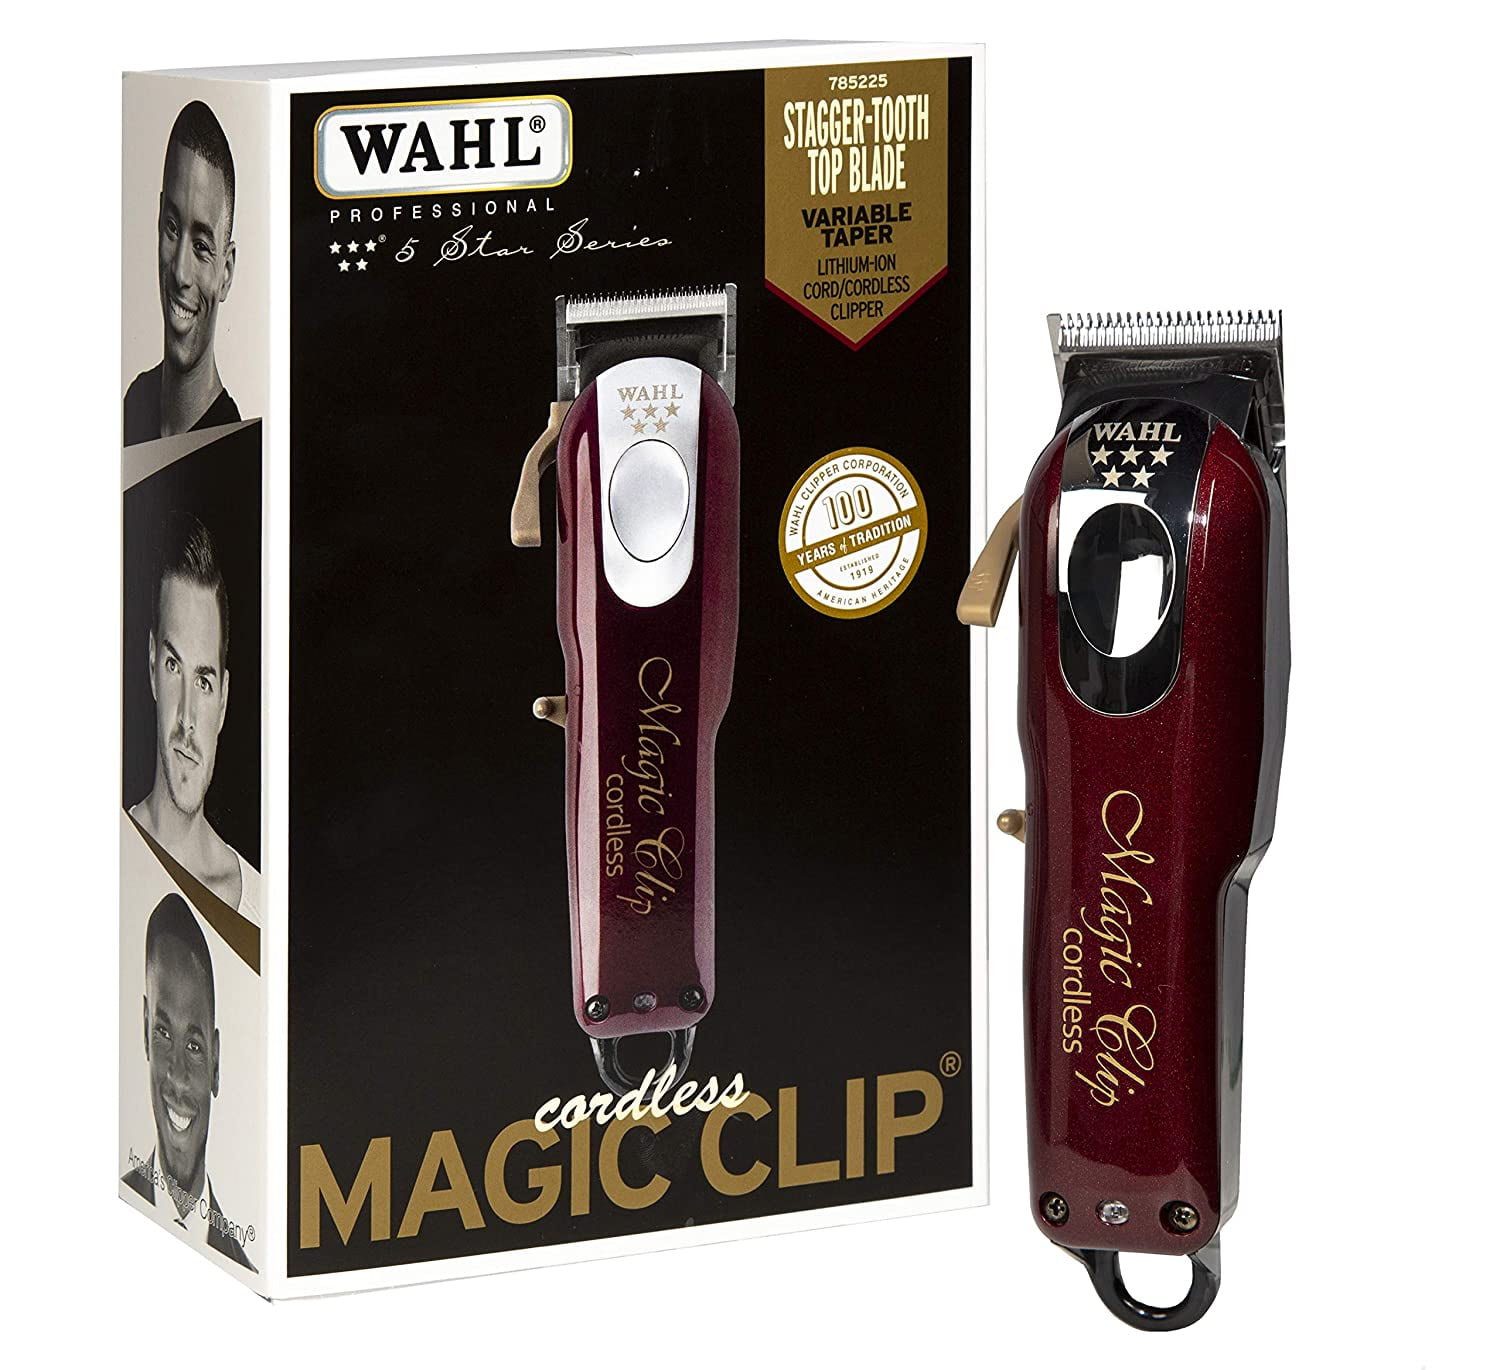 Wahl Professional 5 Star Cordless Magic Clip Hair Clipper with 100+ Minute  Run Time for Professional Barbers and Stylists 